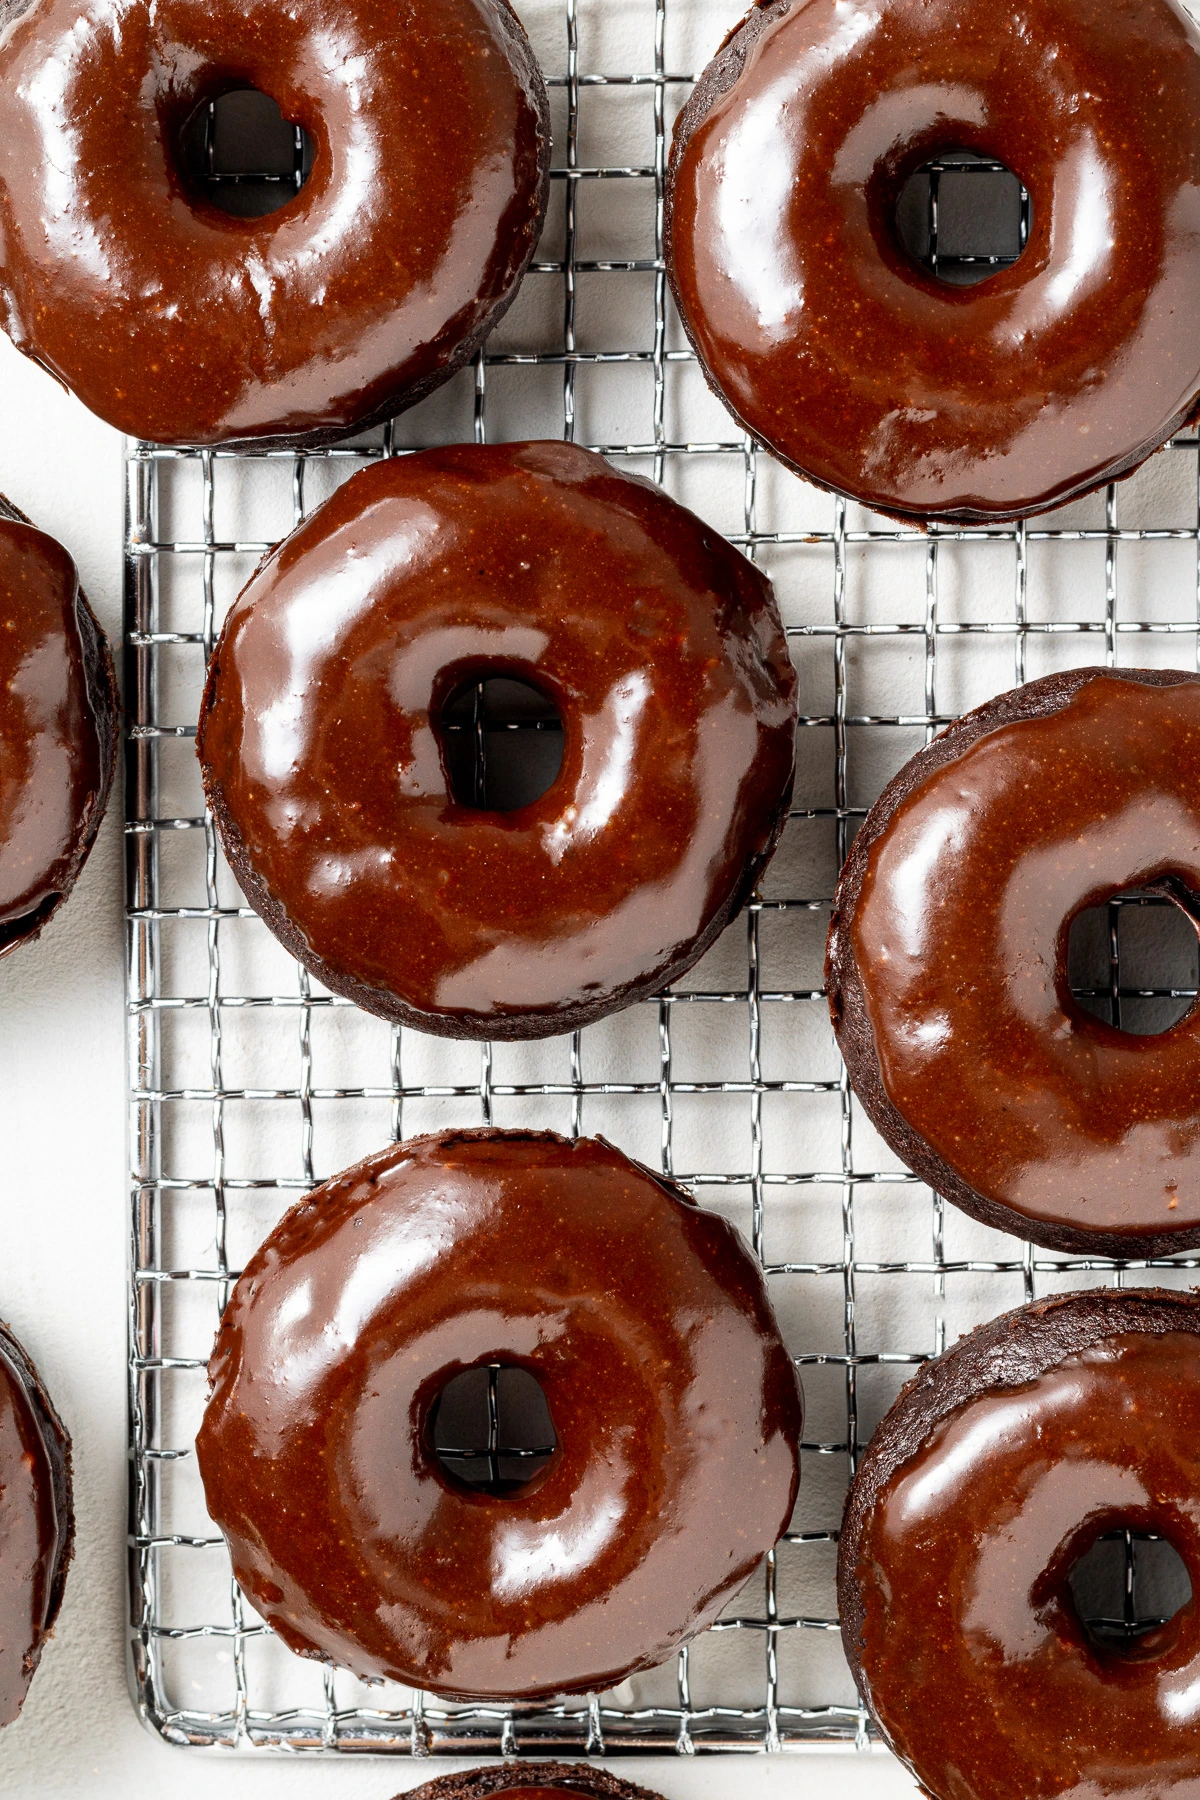 Donuts with chocolate glaze on a cooling rack